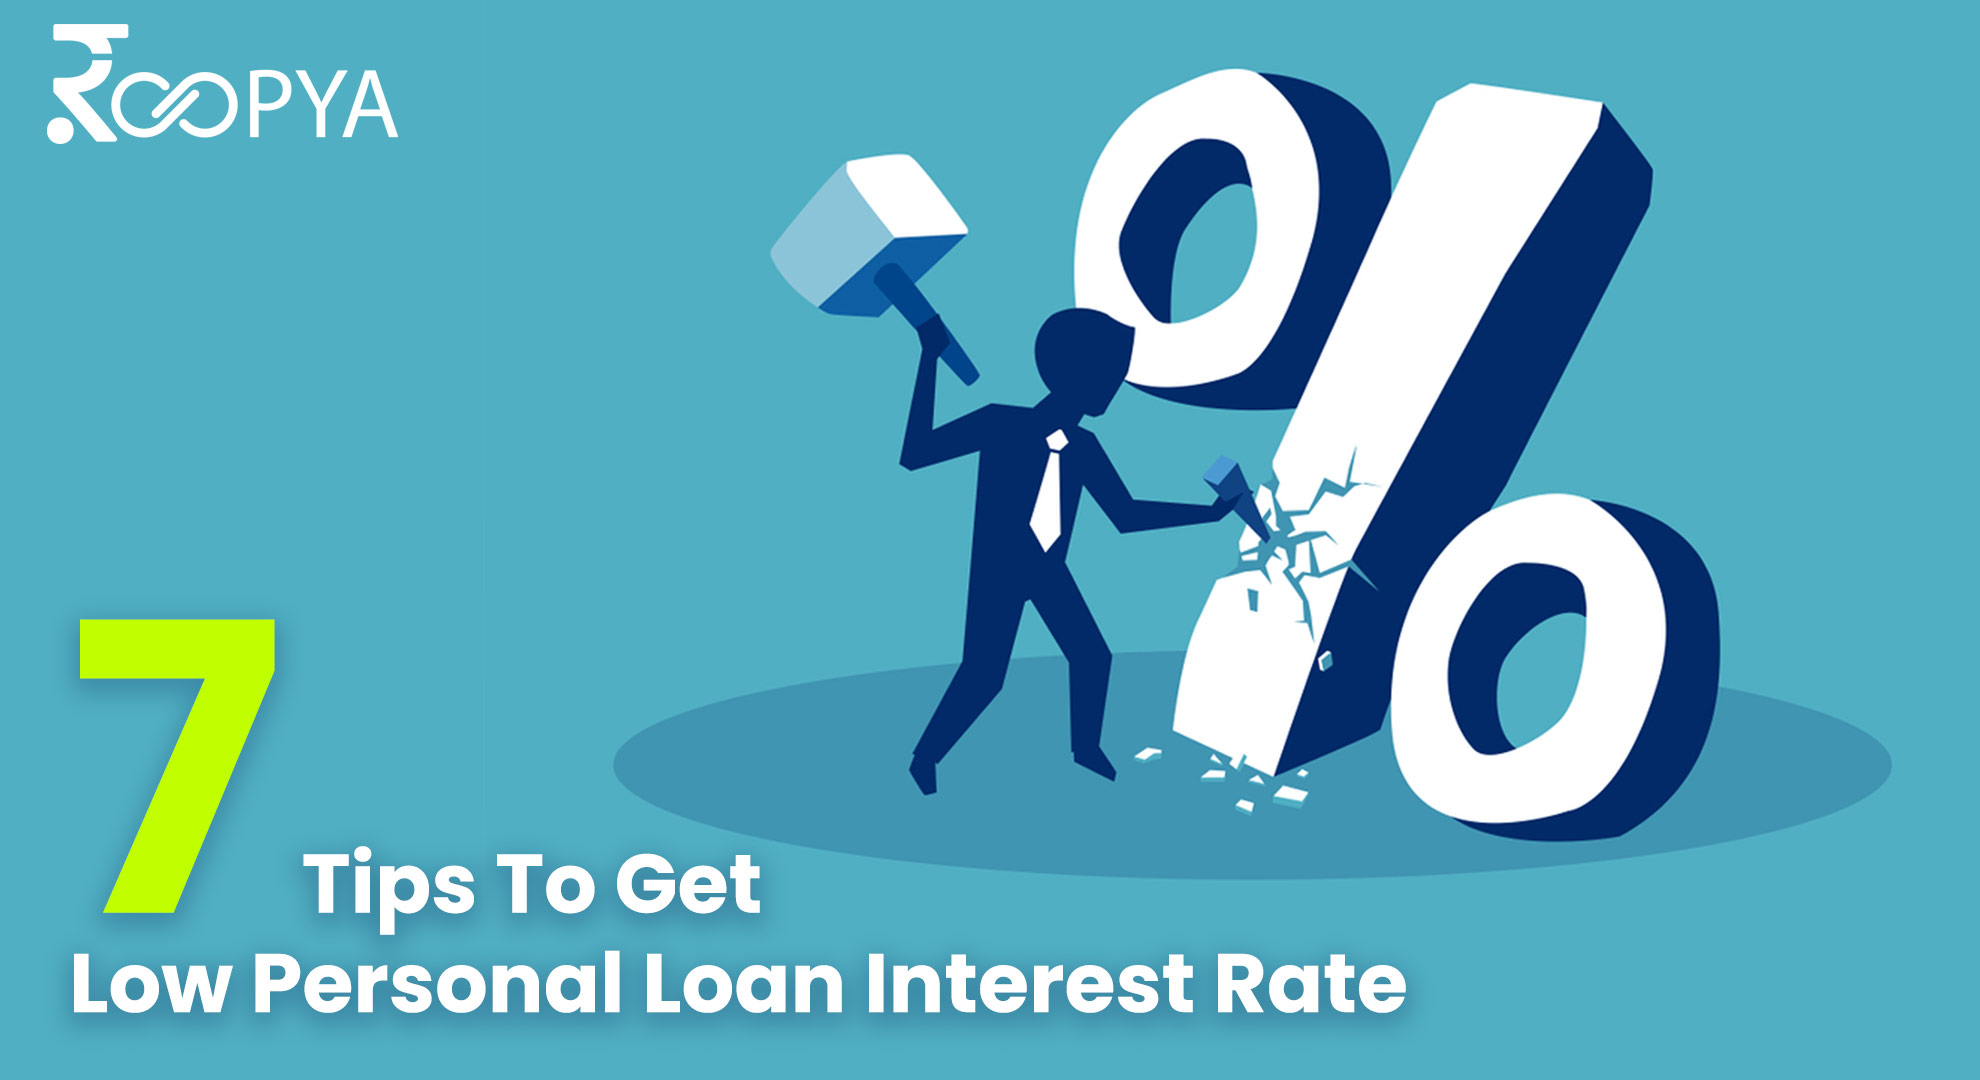 Low Personal Loan Interest Rate